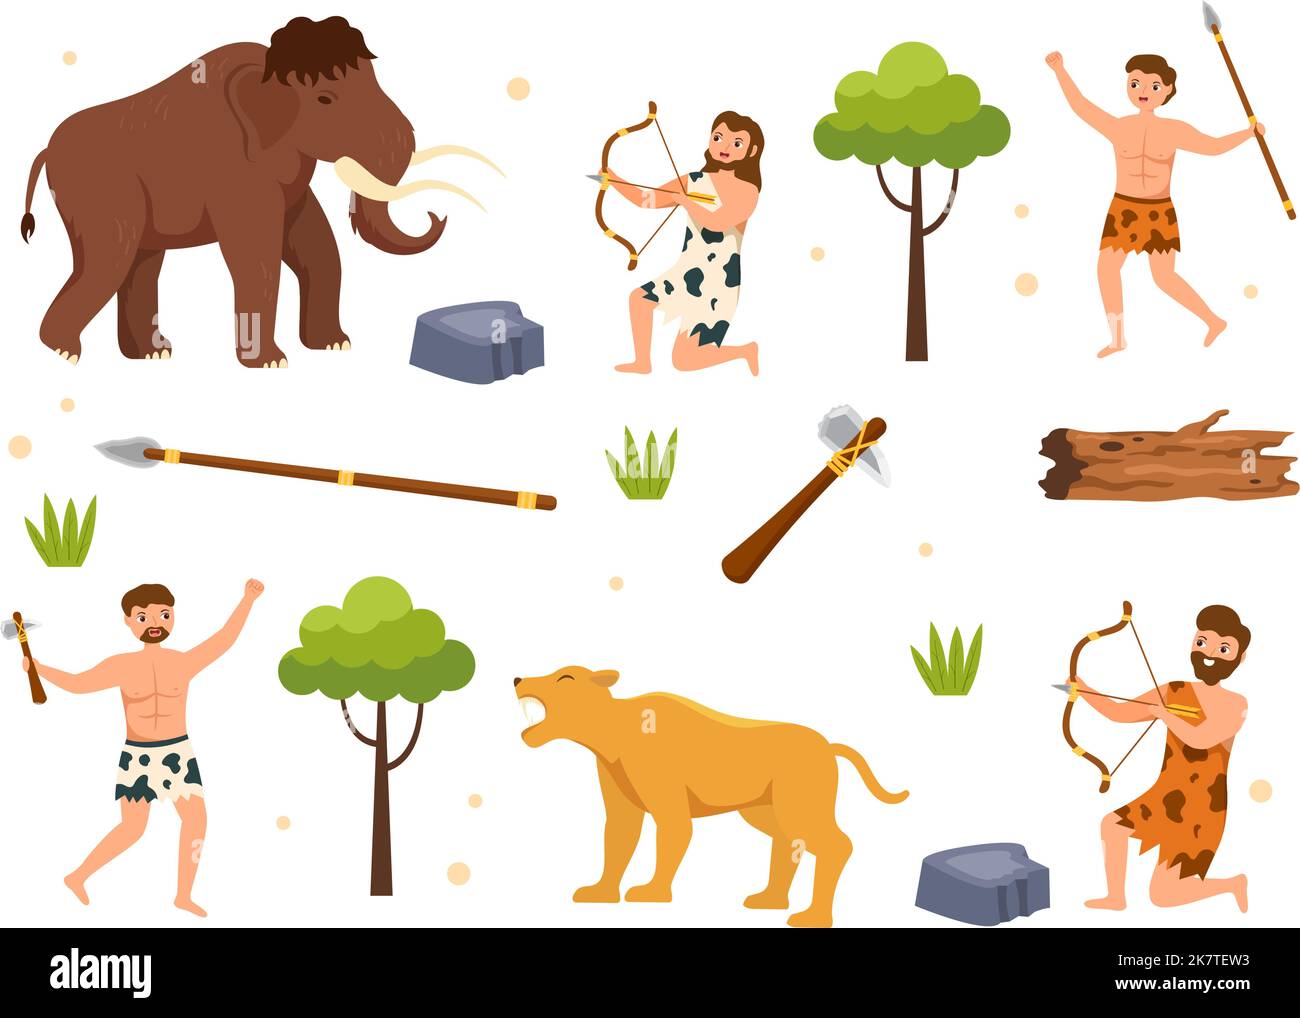 Prehistoric Stone Age Tribes Hunting Large Animals with Weapon in Flat Cartoon Hand Drawing Template Illustration Stock Vector